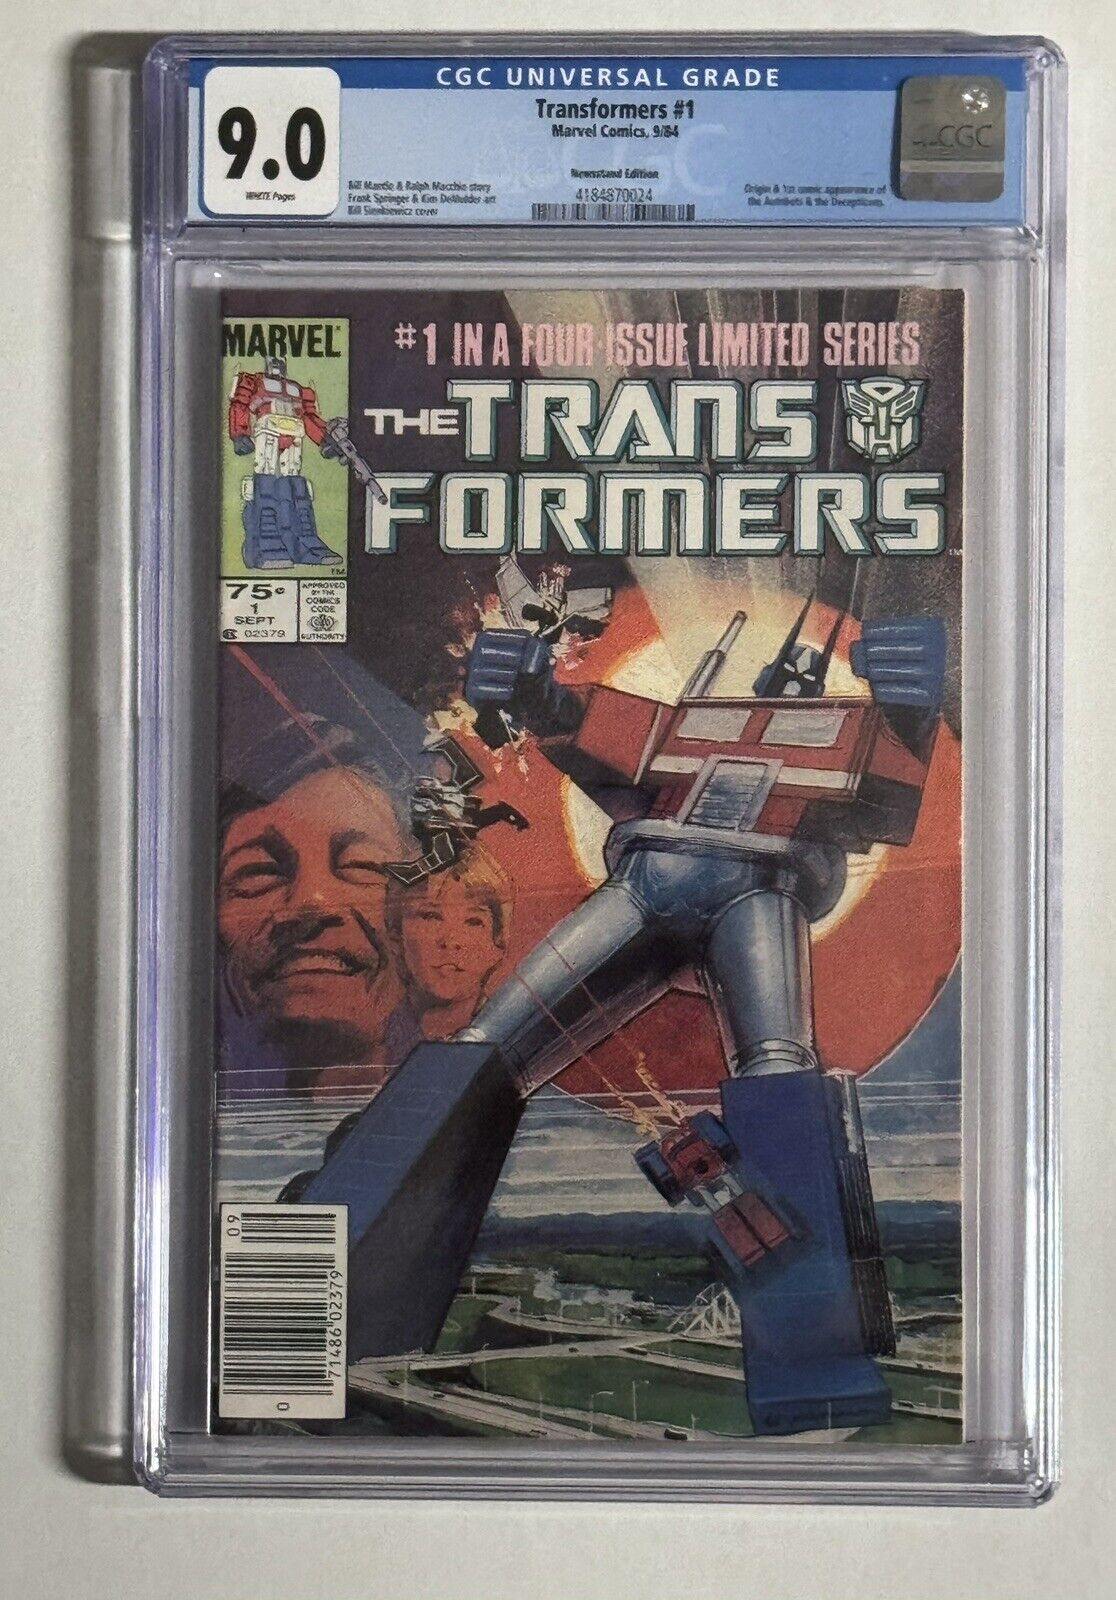 TRANSFORMERS #1 newsstand CGC 9.0 white pages (MARVEL 1984)